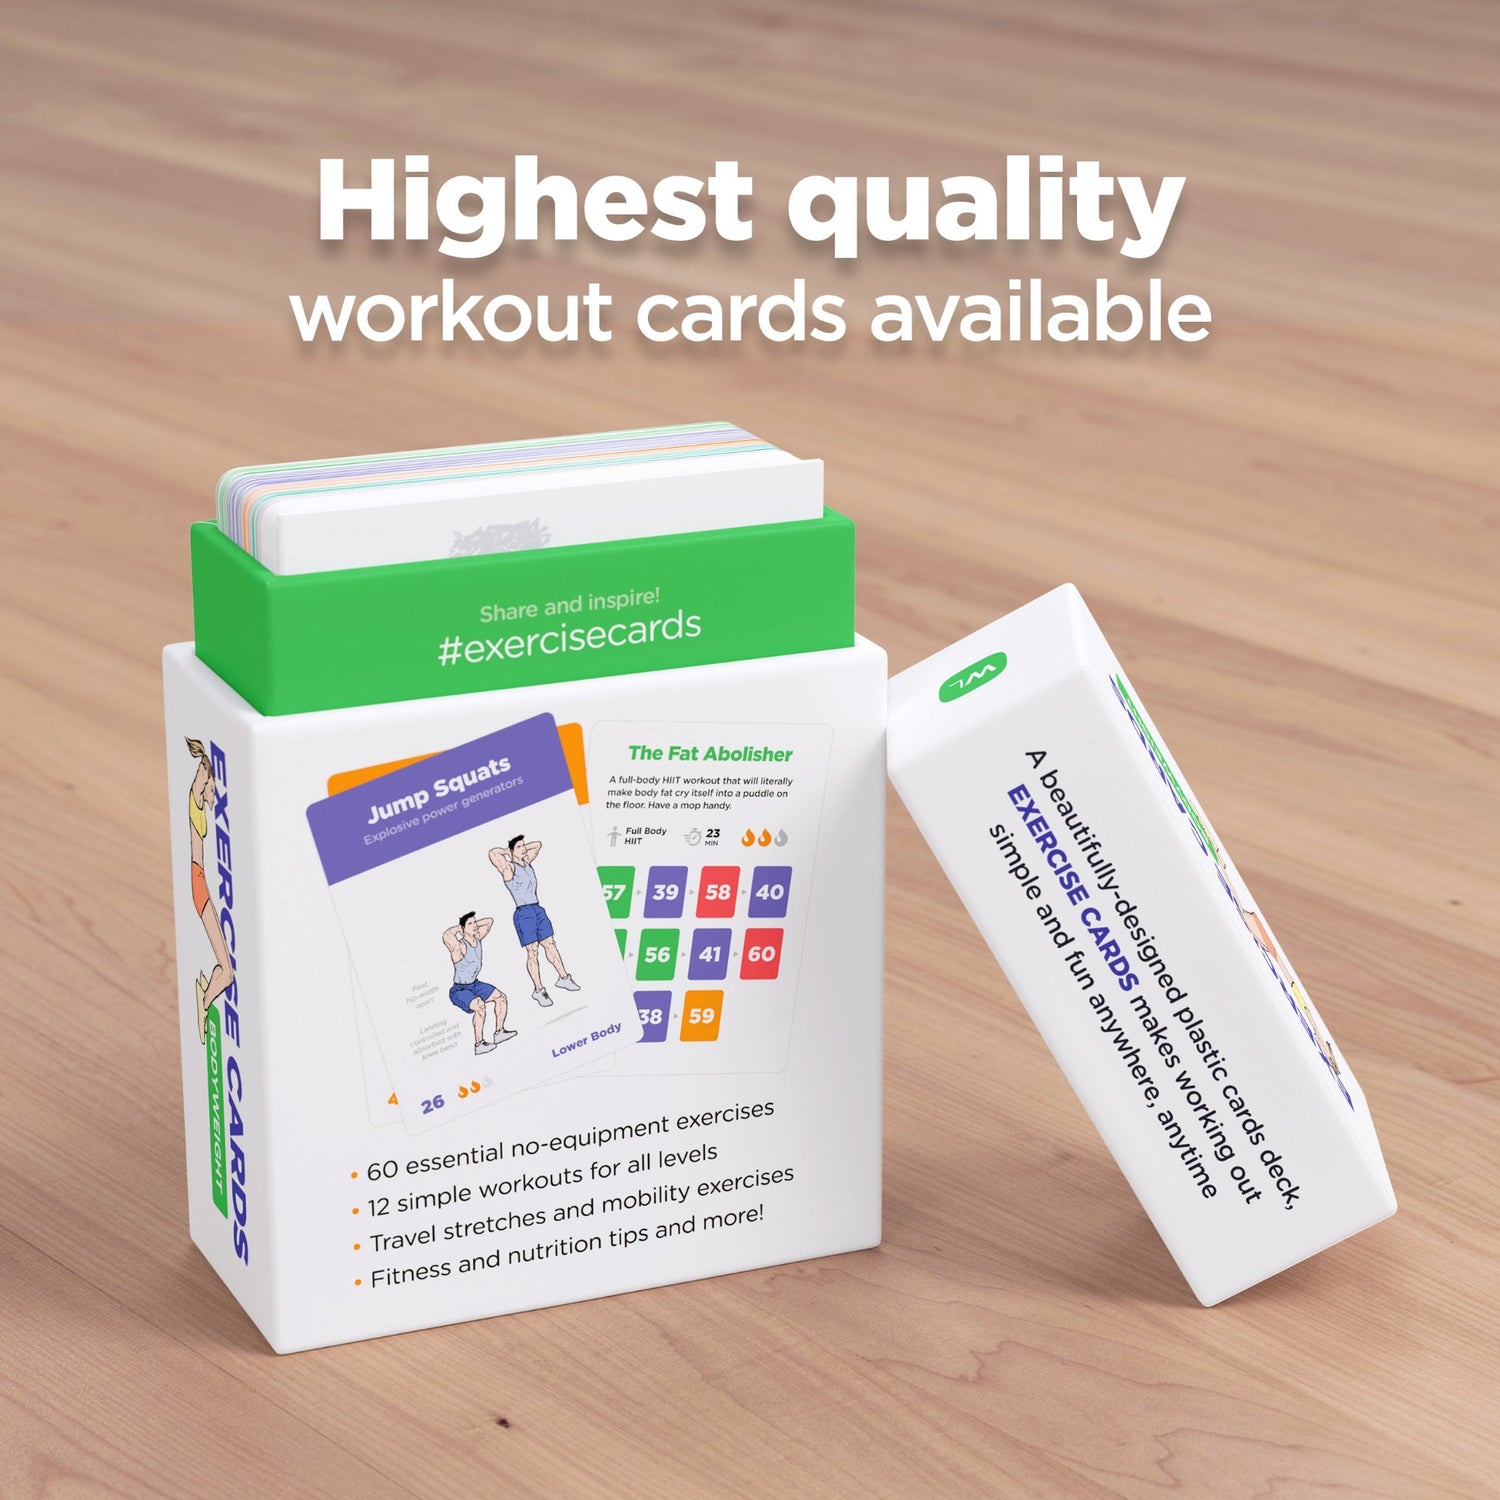 Weight loss workouts anytime anywhere with WorkoutLabs Exercise Cards